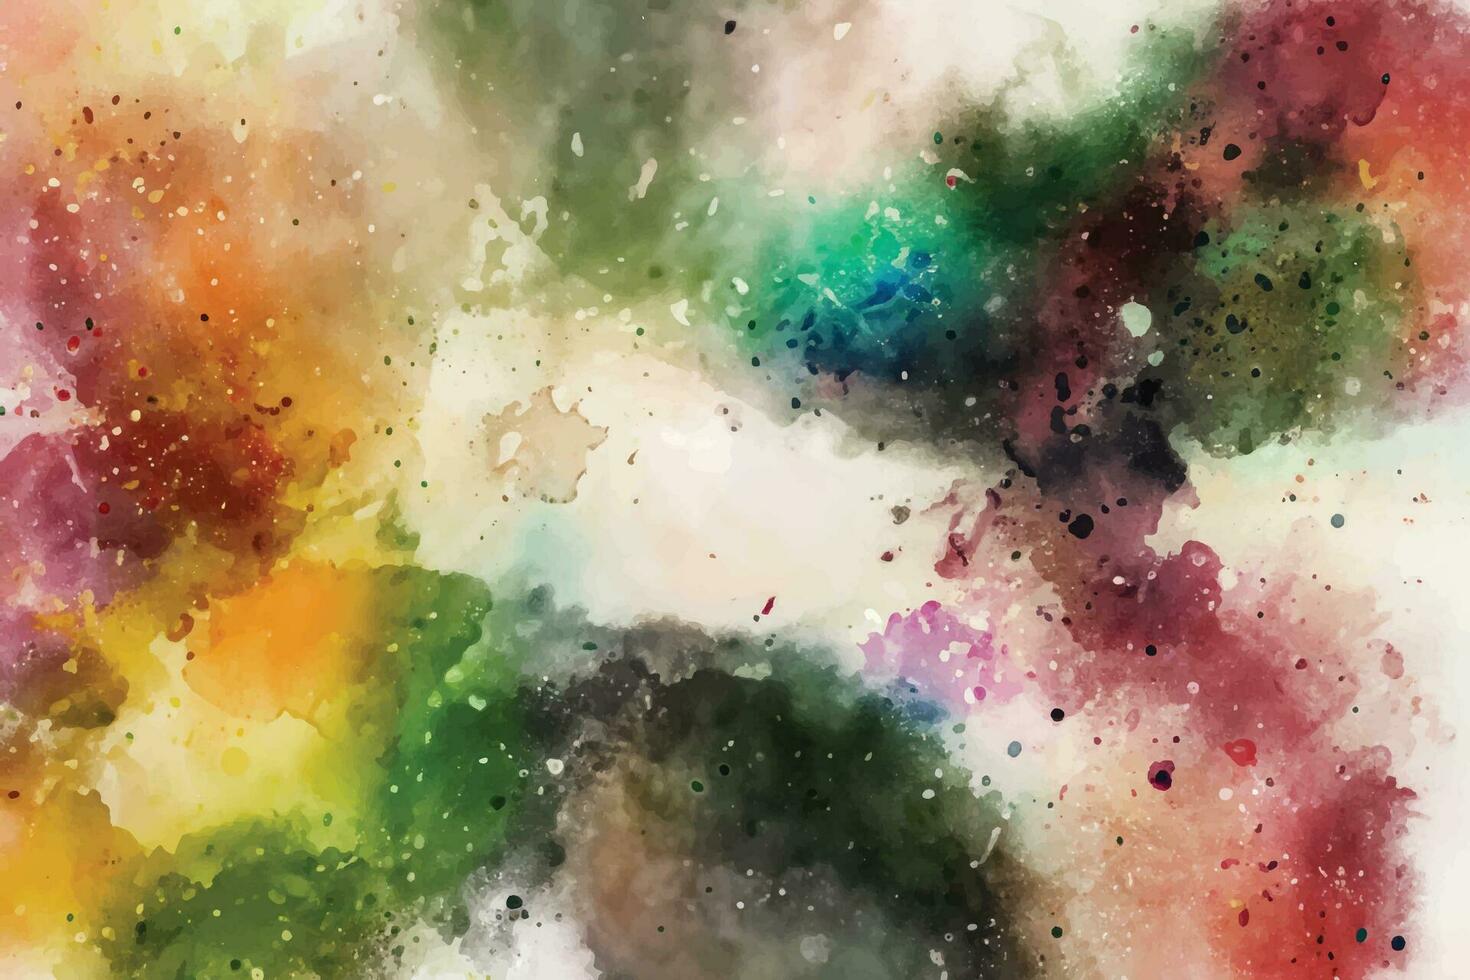 Abstract background with a colourful watercolour splatter design vector